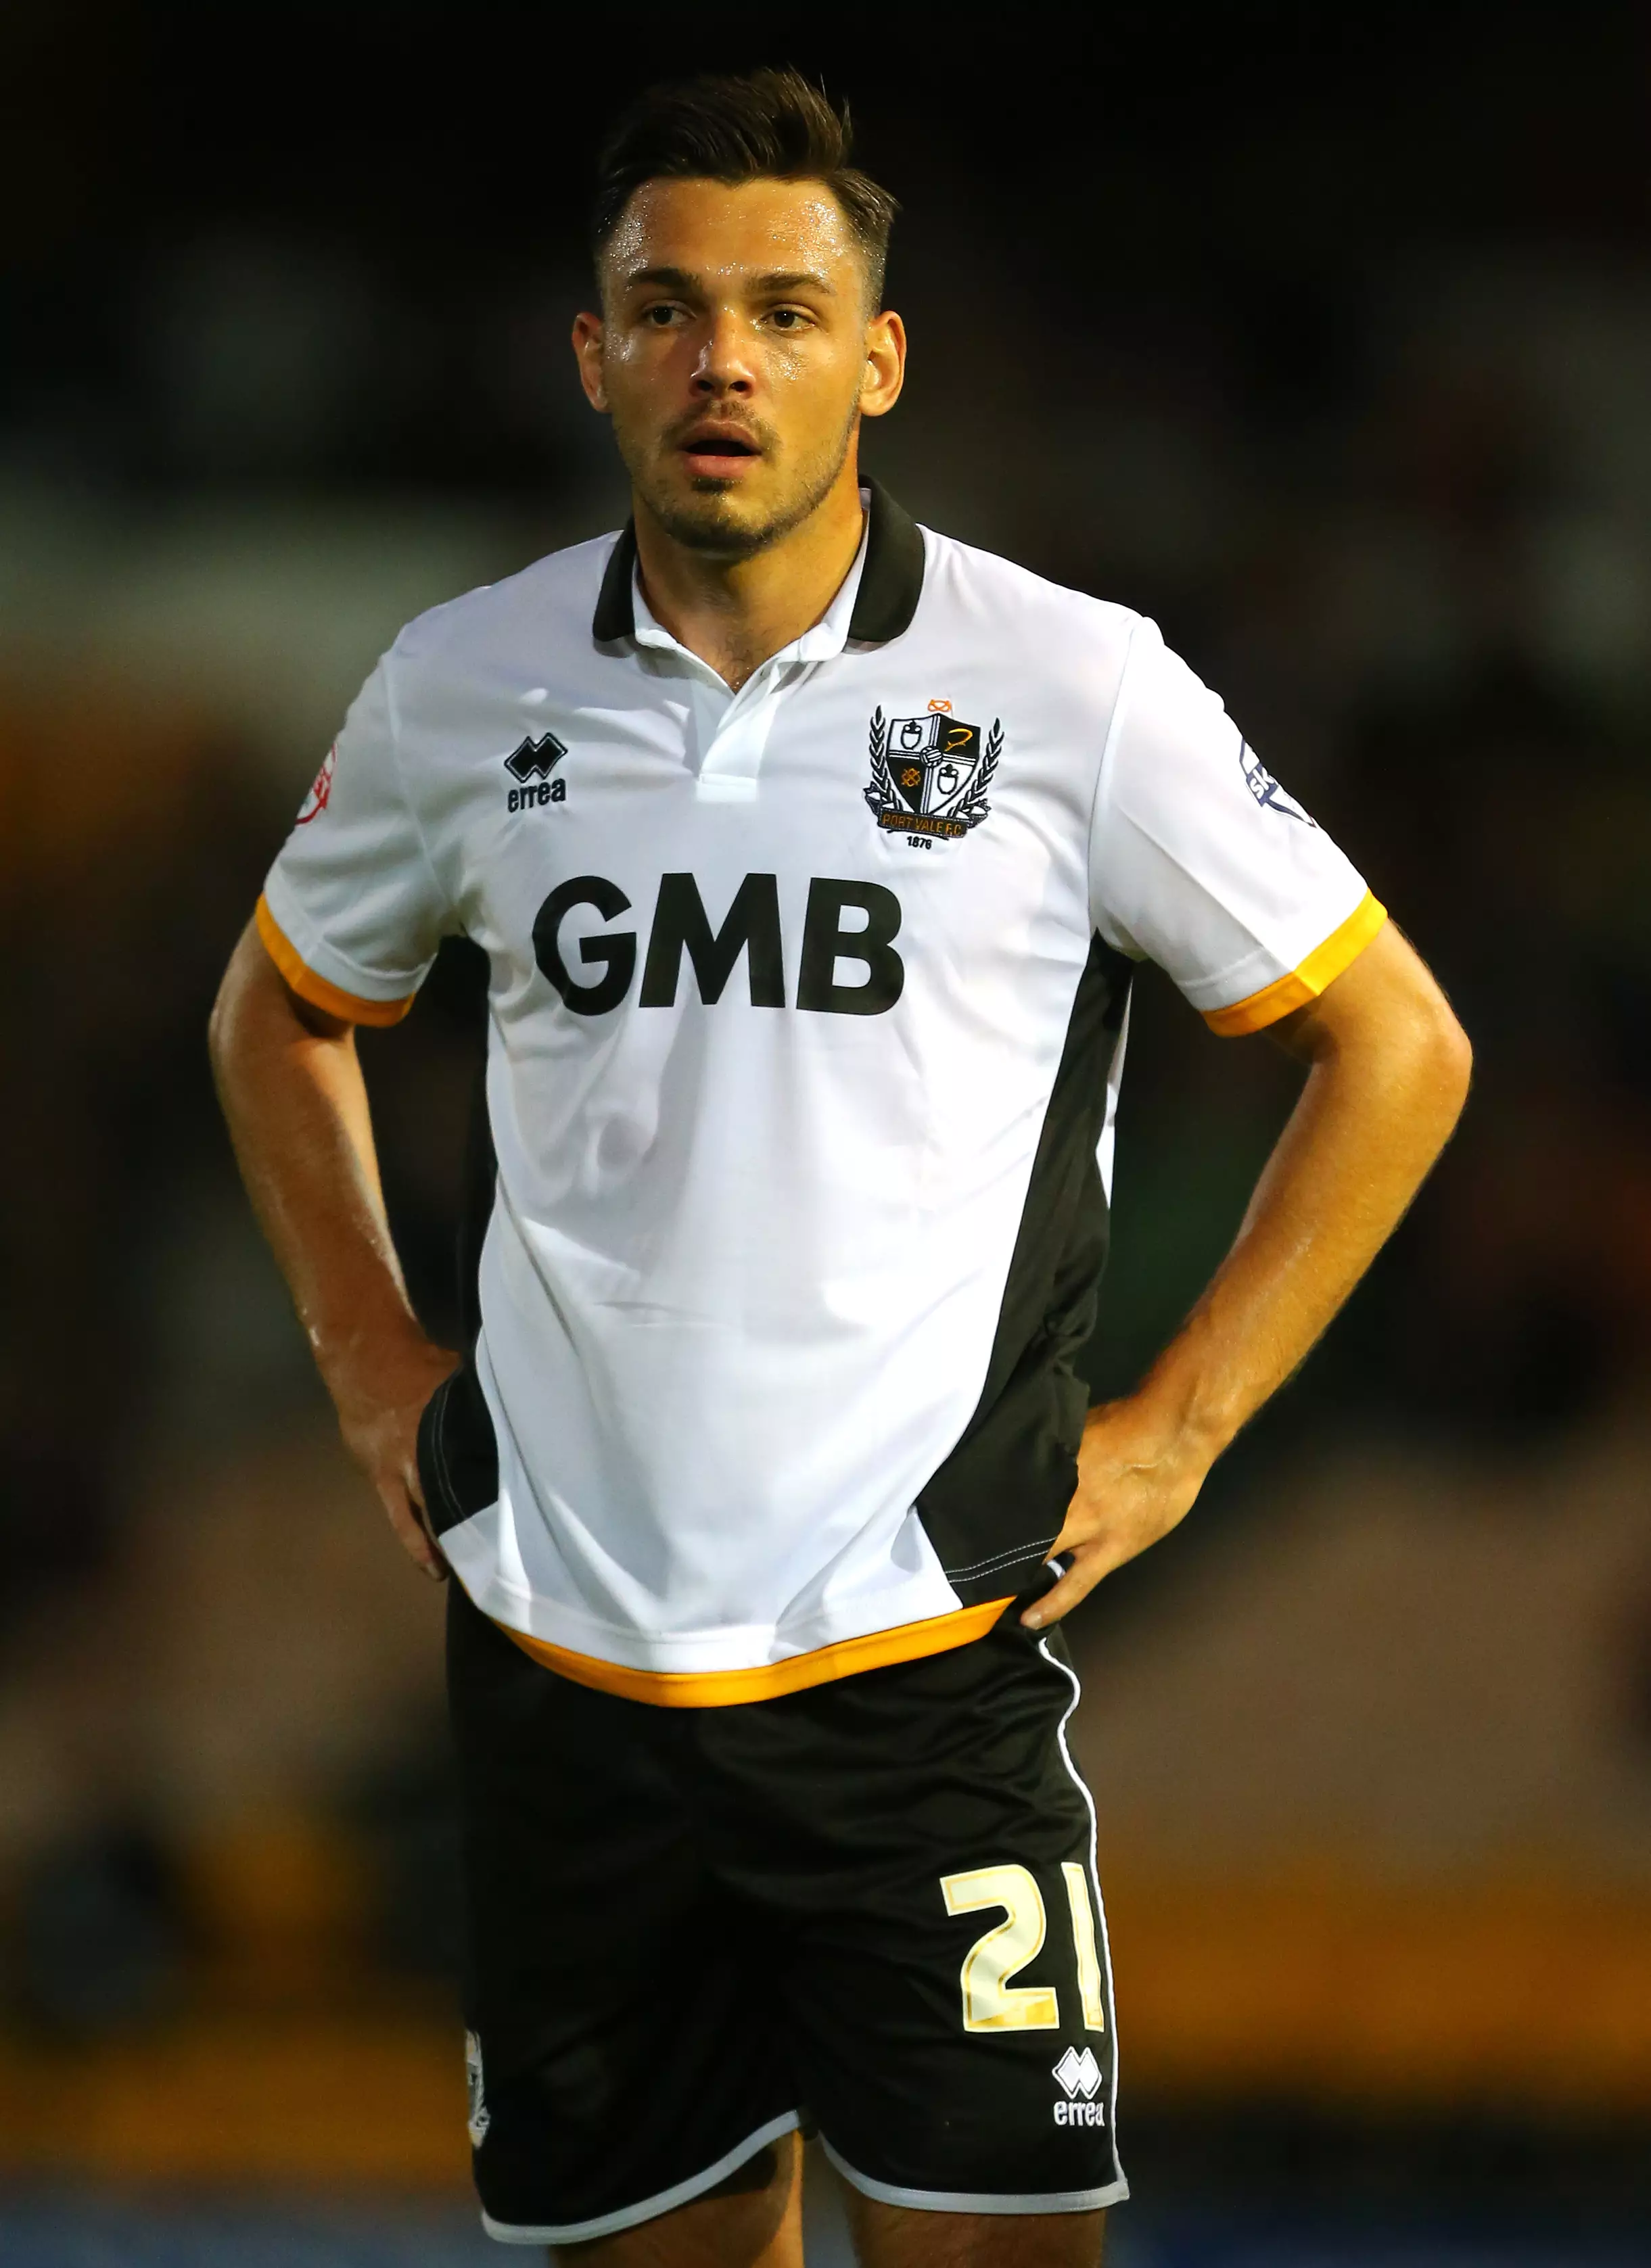 The majority of Veseli's appearances in England came during loan spells with Bury and Port Vale. Image: PA